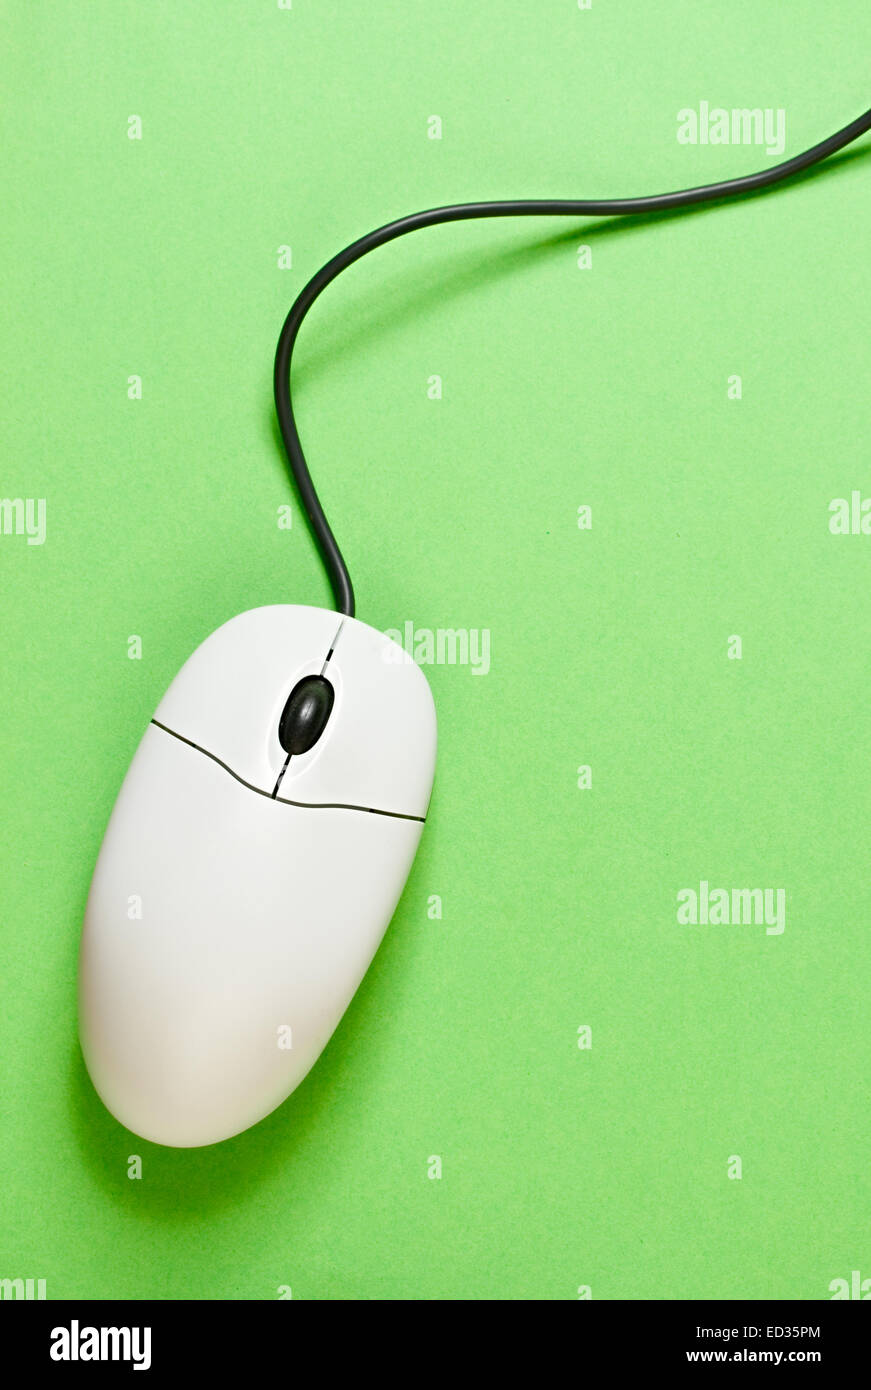 Computer mouse on green background Stock Photo